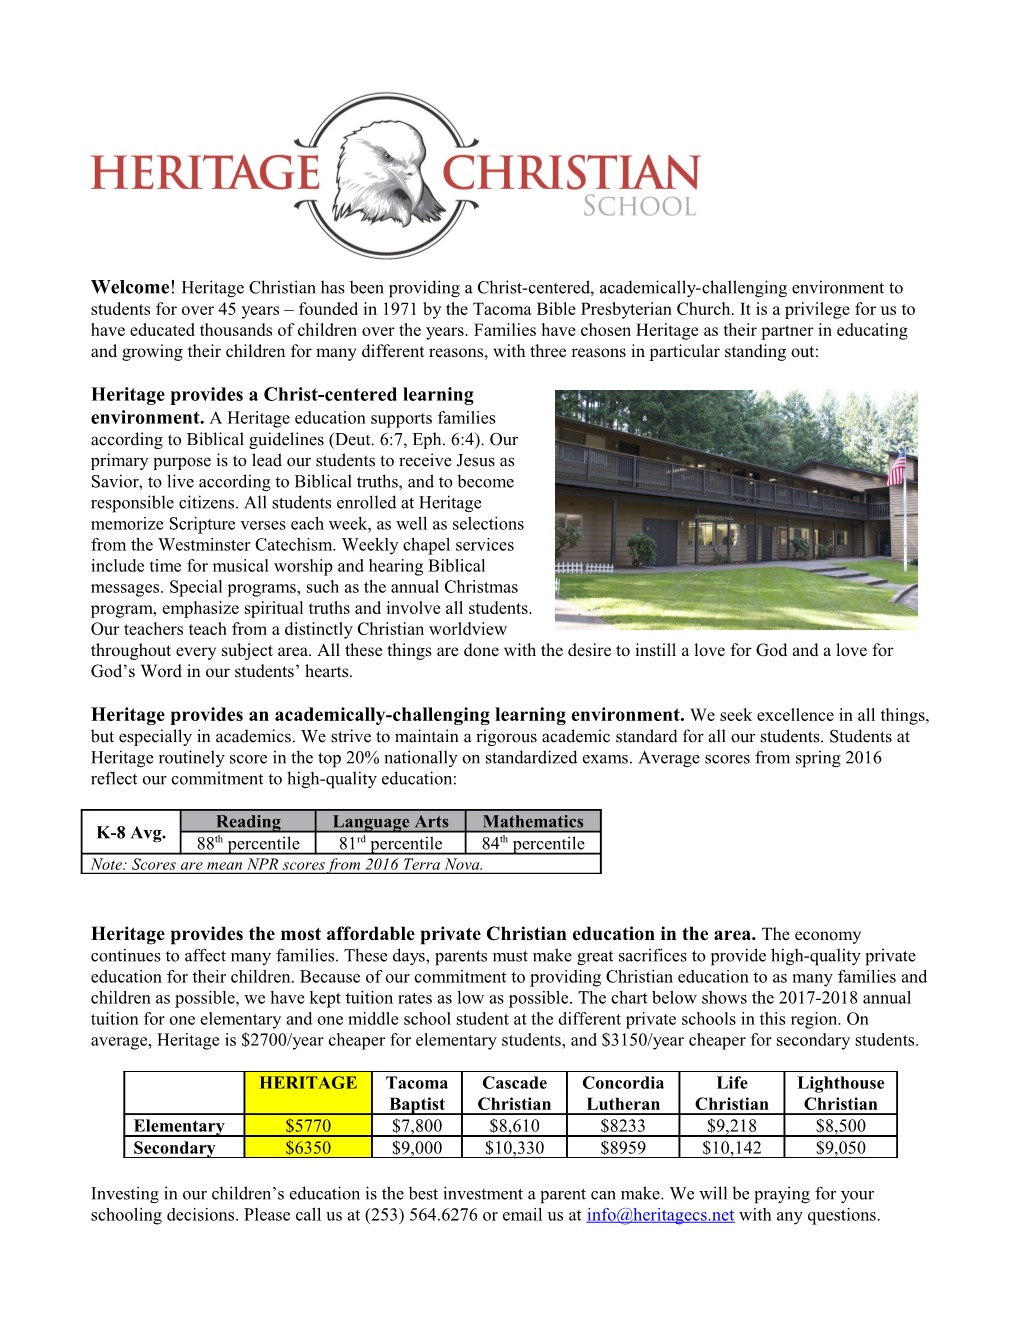 Welcome! Heritage Christian Has Been Providing a Christ-Centered, Academically-Challenging